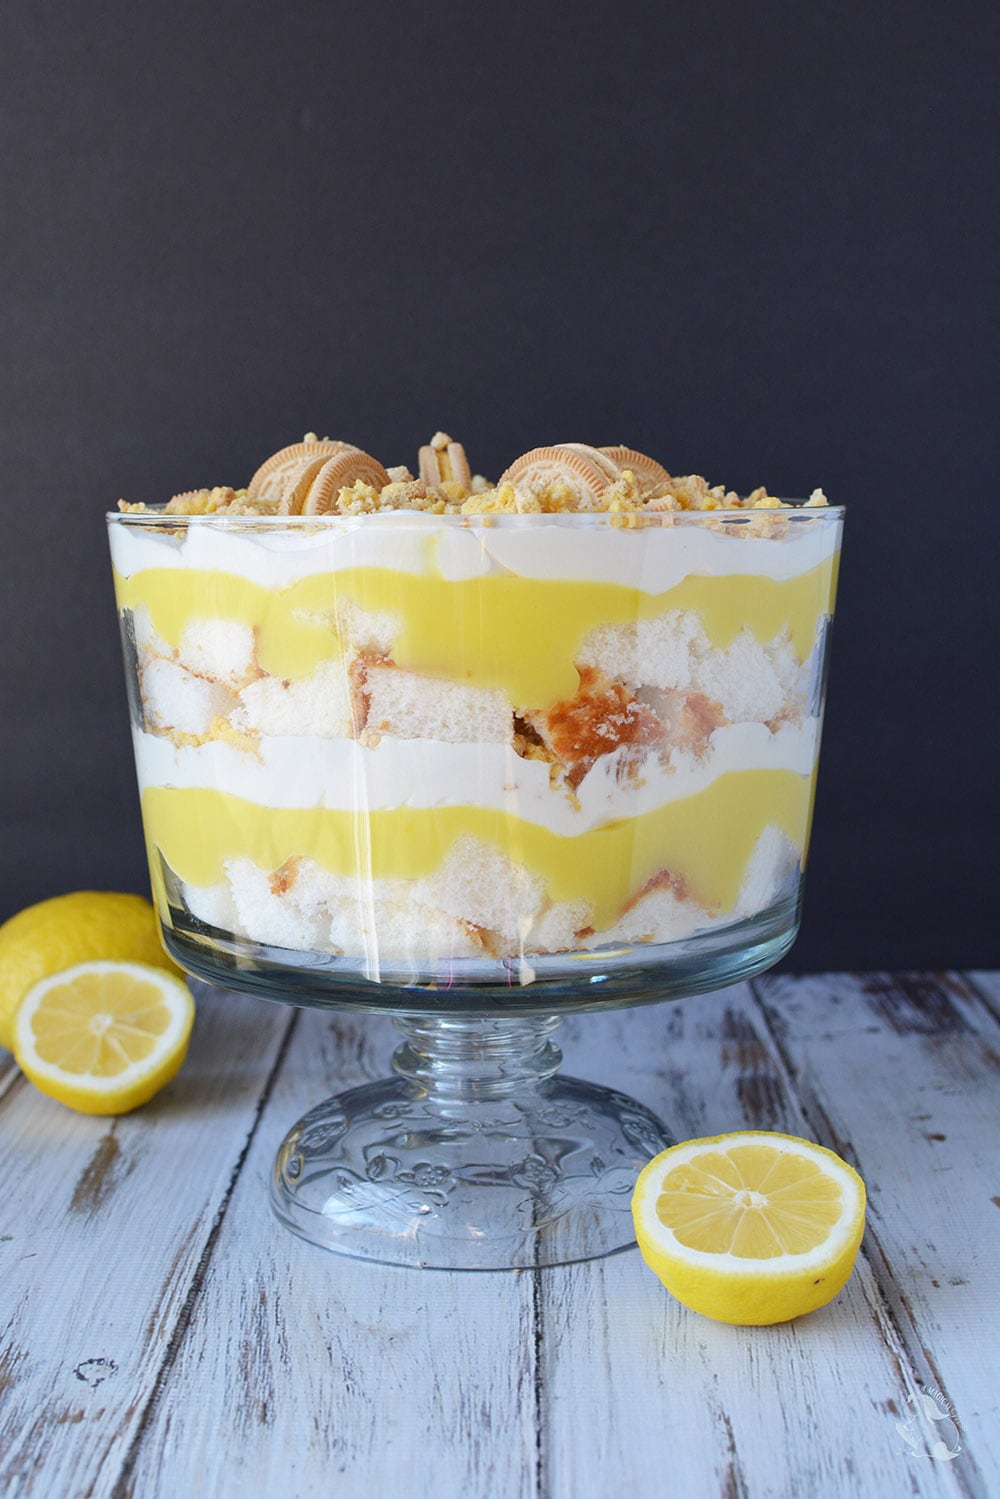 Easy lemon dessert with layers of cake and whipped topping